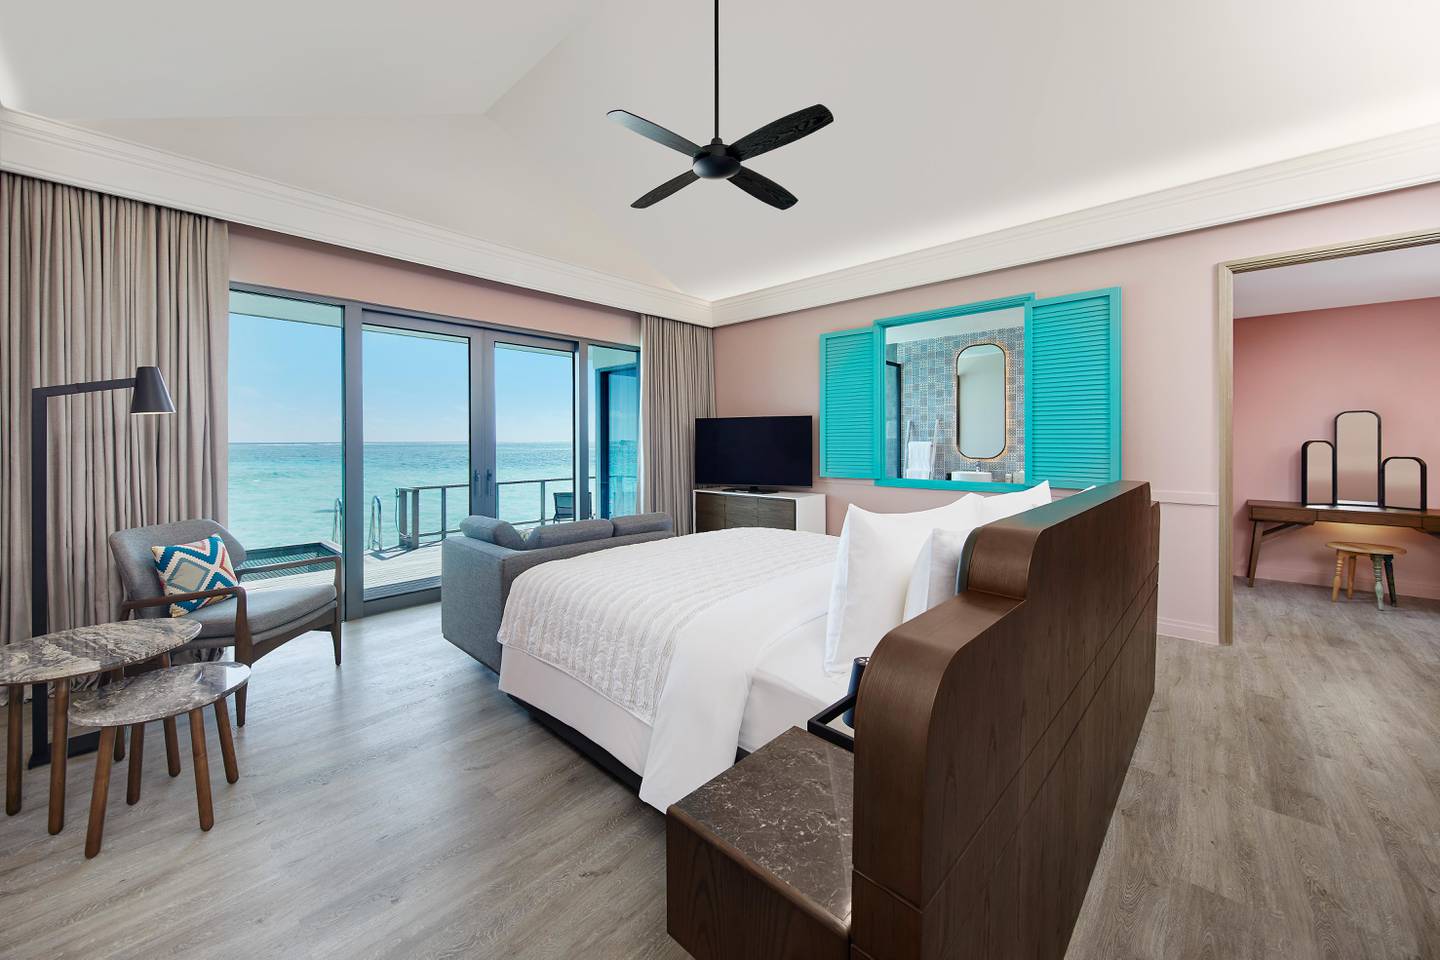 The overwater villa at the property. Photo: Le Meridien Maldives Resort & Spa